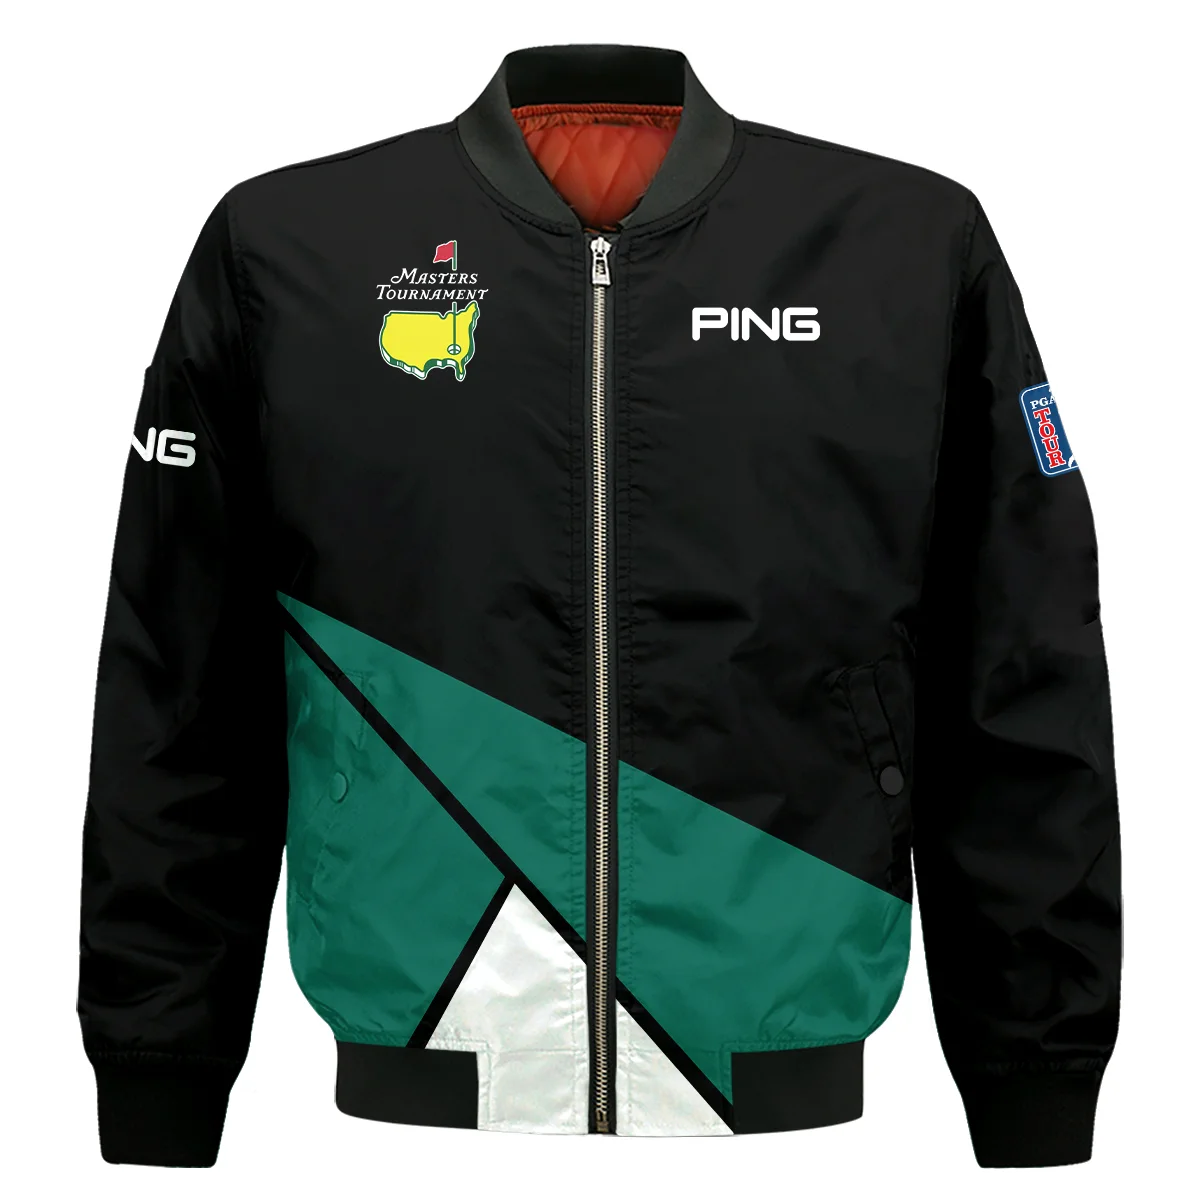 Golf Masters Tournament Ping Bomber Jacket Black And Green Golf Sports All Over Print Bomber Jacket